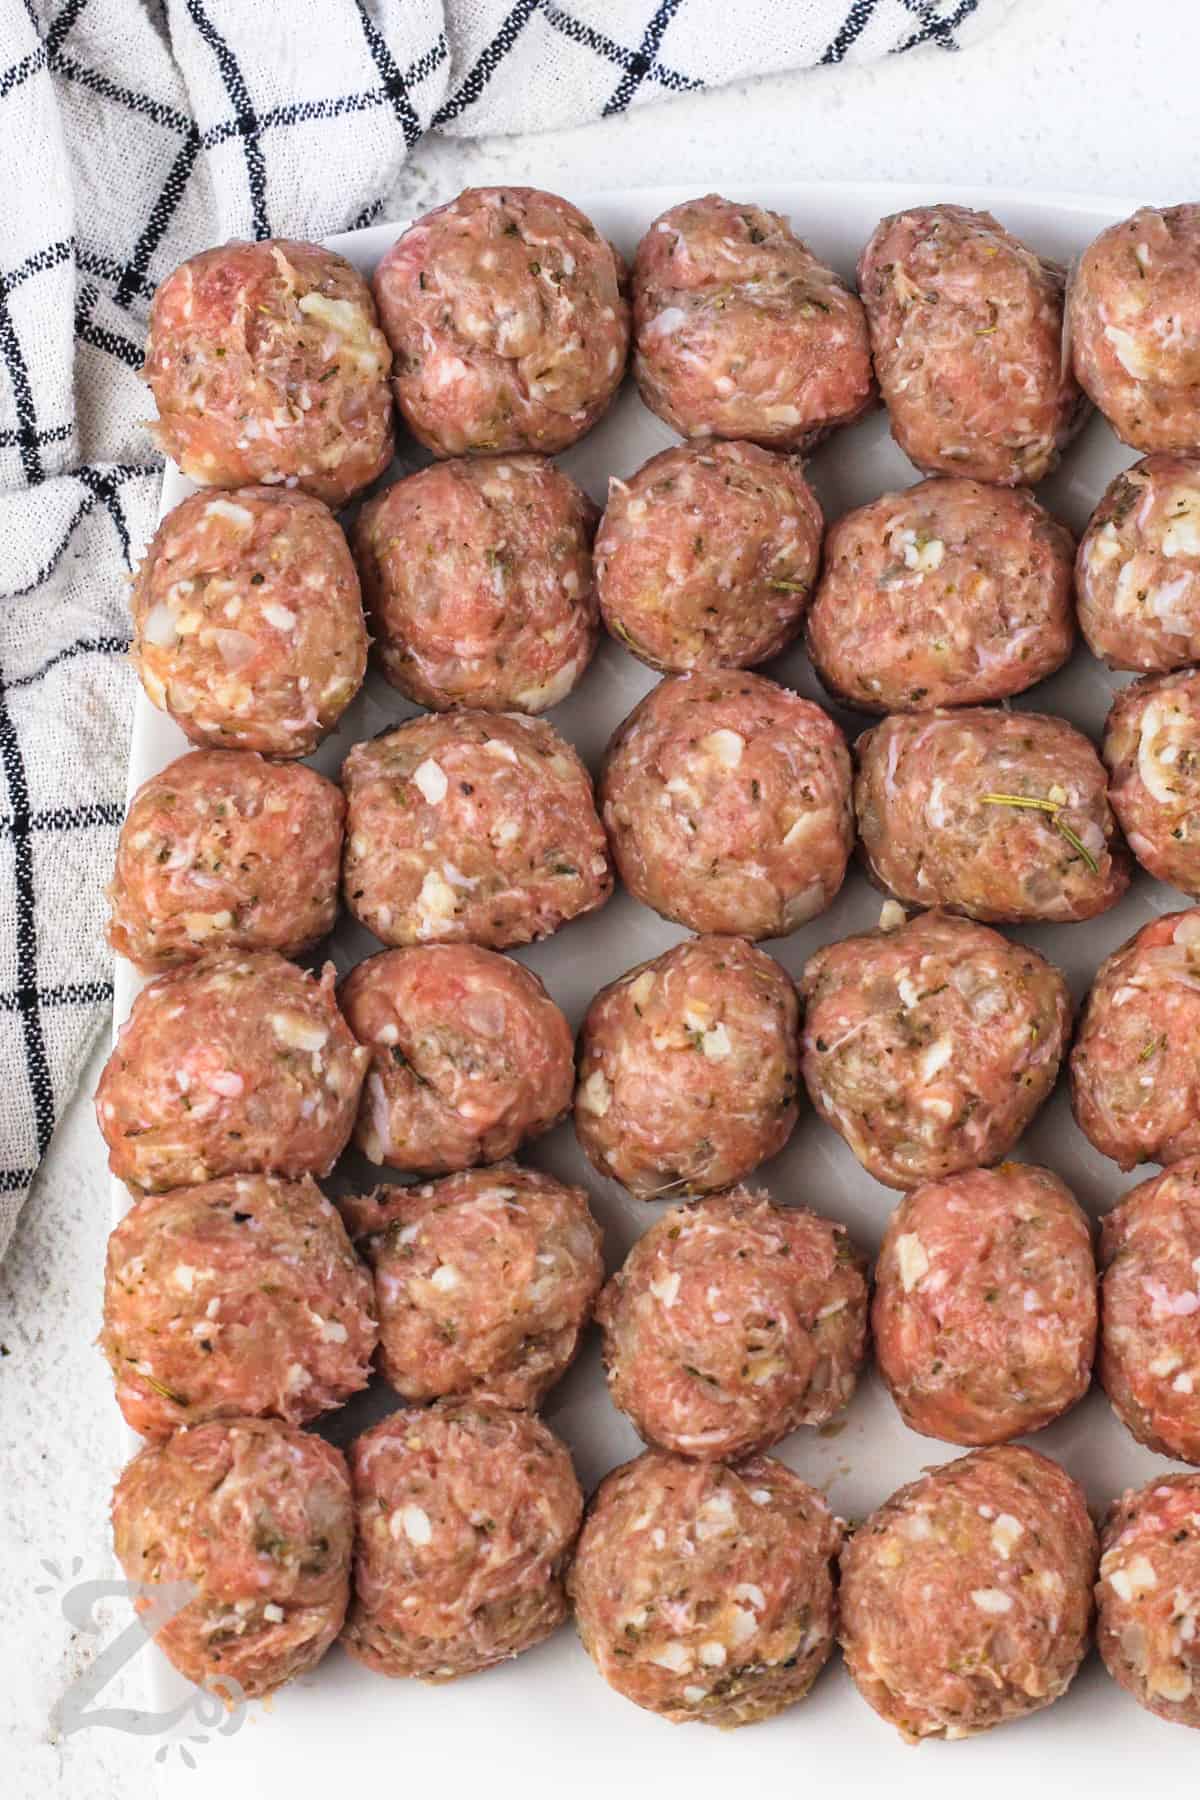 Chicken meatballs on a plate before being baked